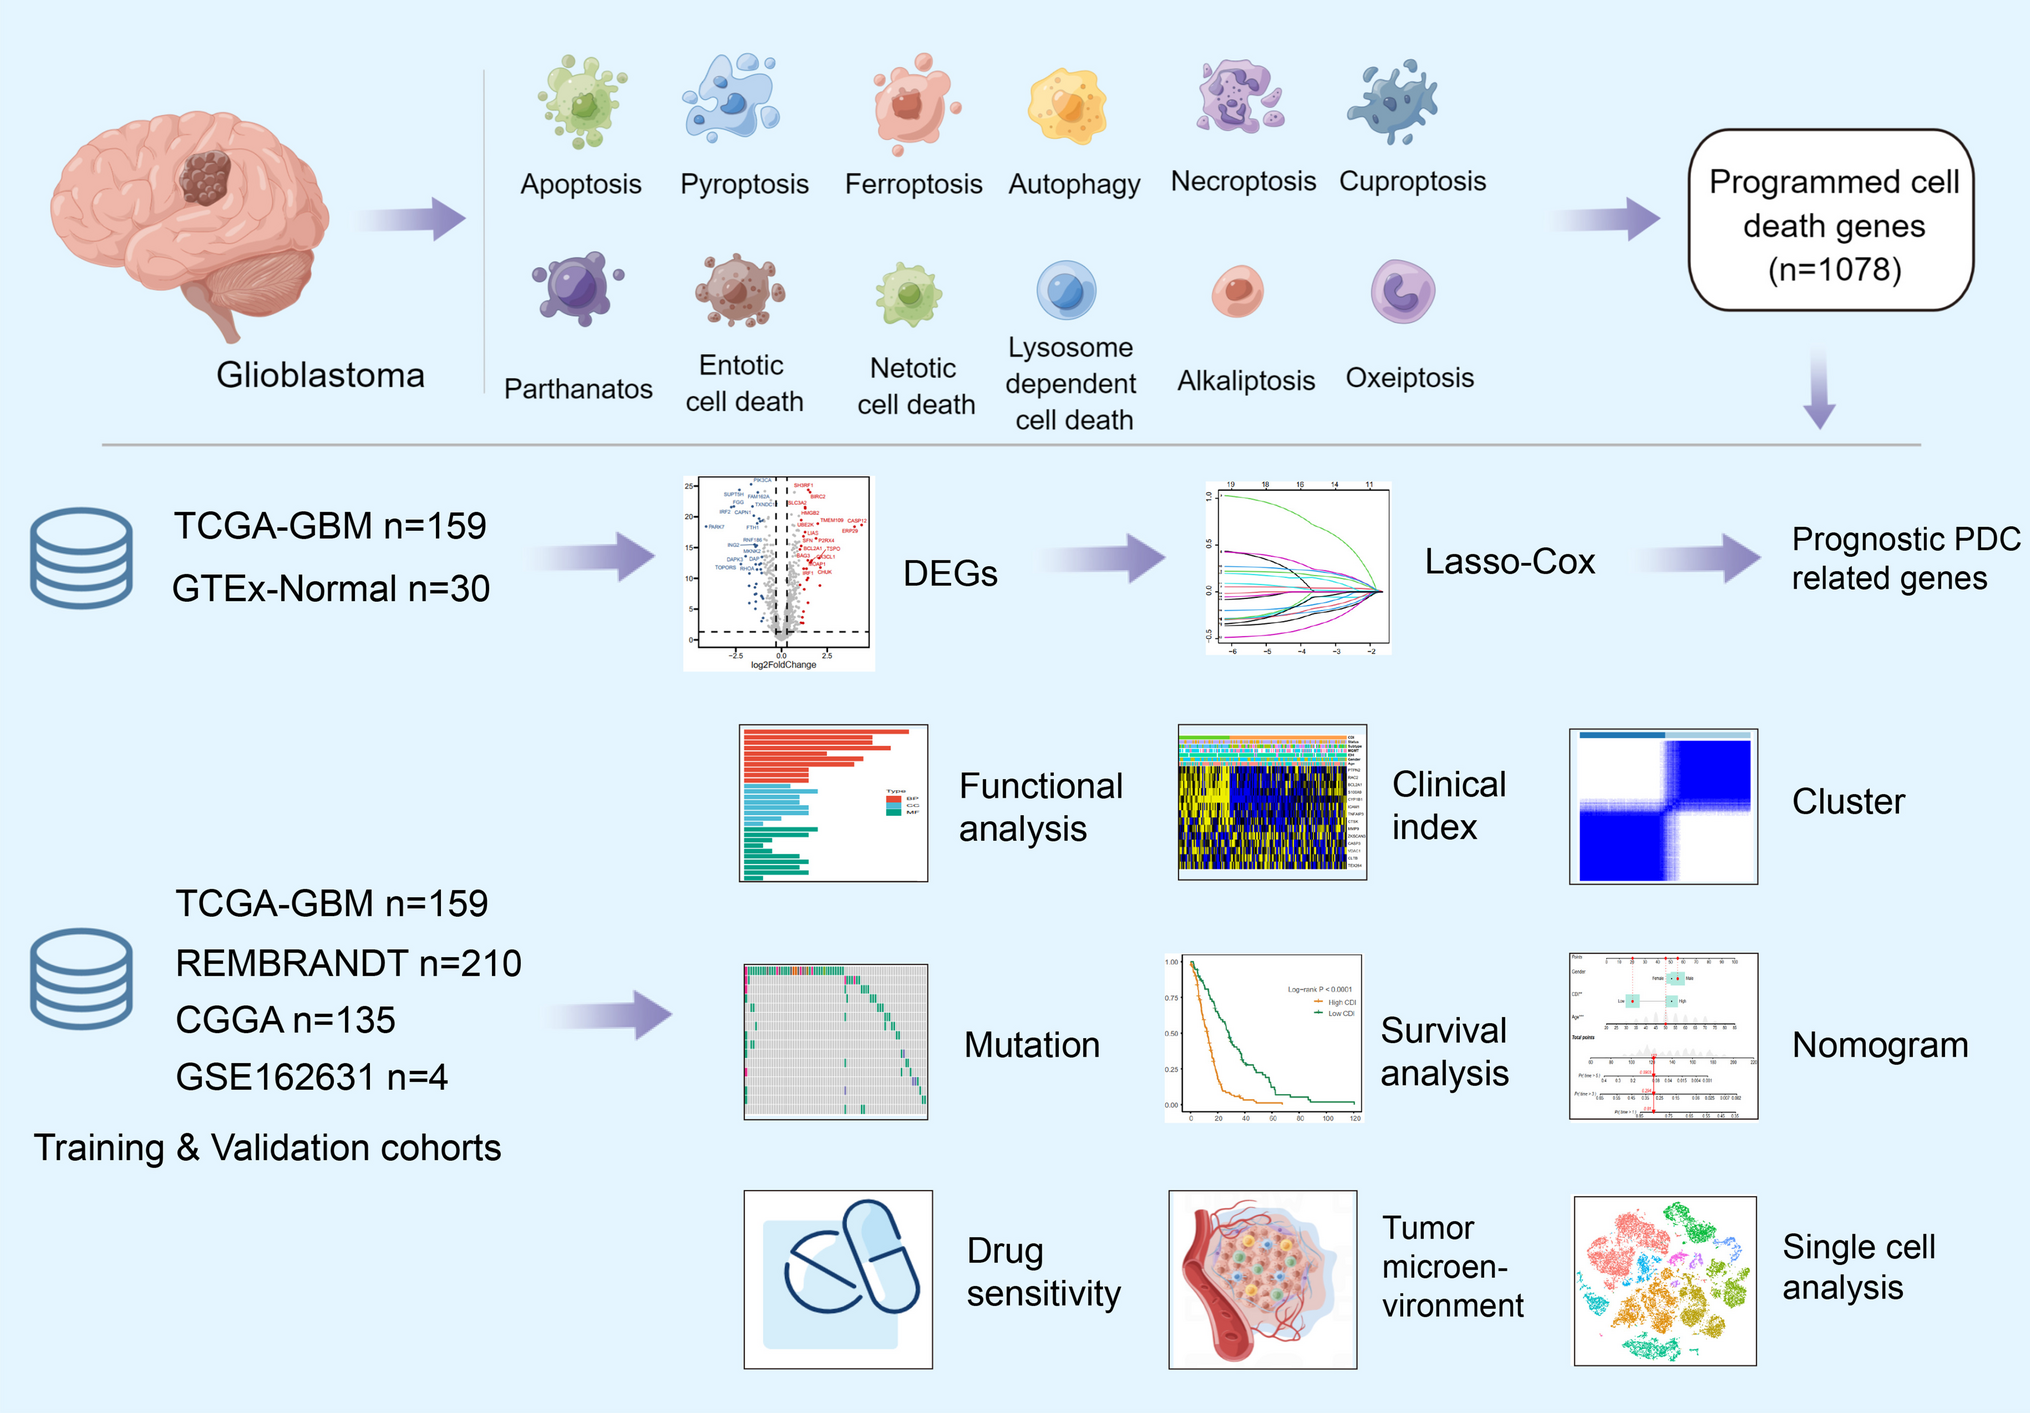 Association Between Diverse Cell Death Patterns Related Gene Signature and Prognosis, Drug Sensitivity, and Immune Microenvironment in Glioblastoma